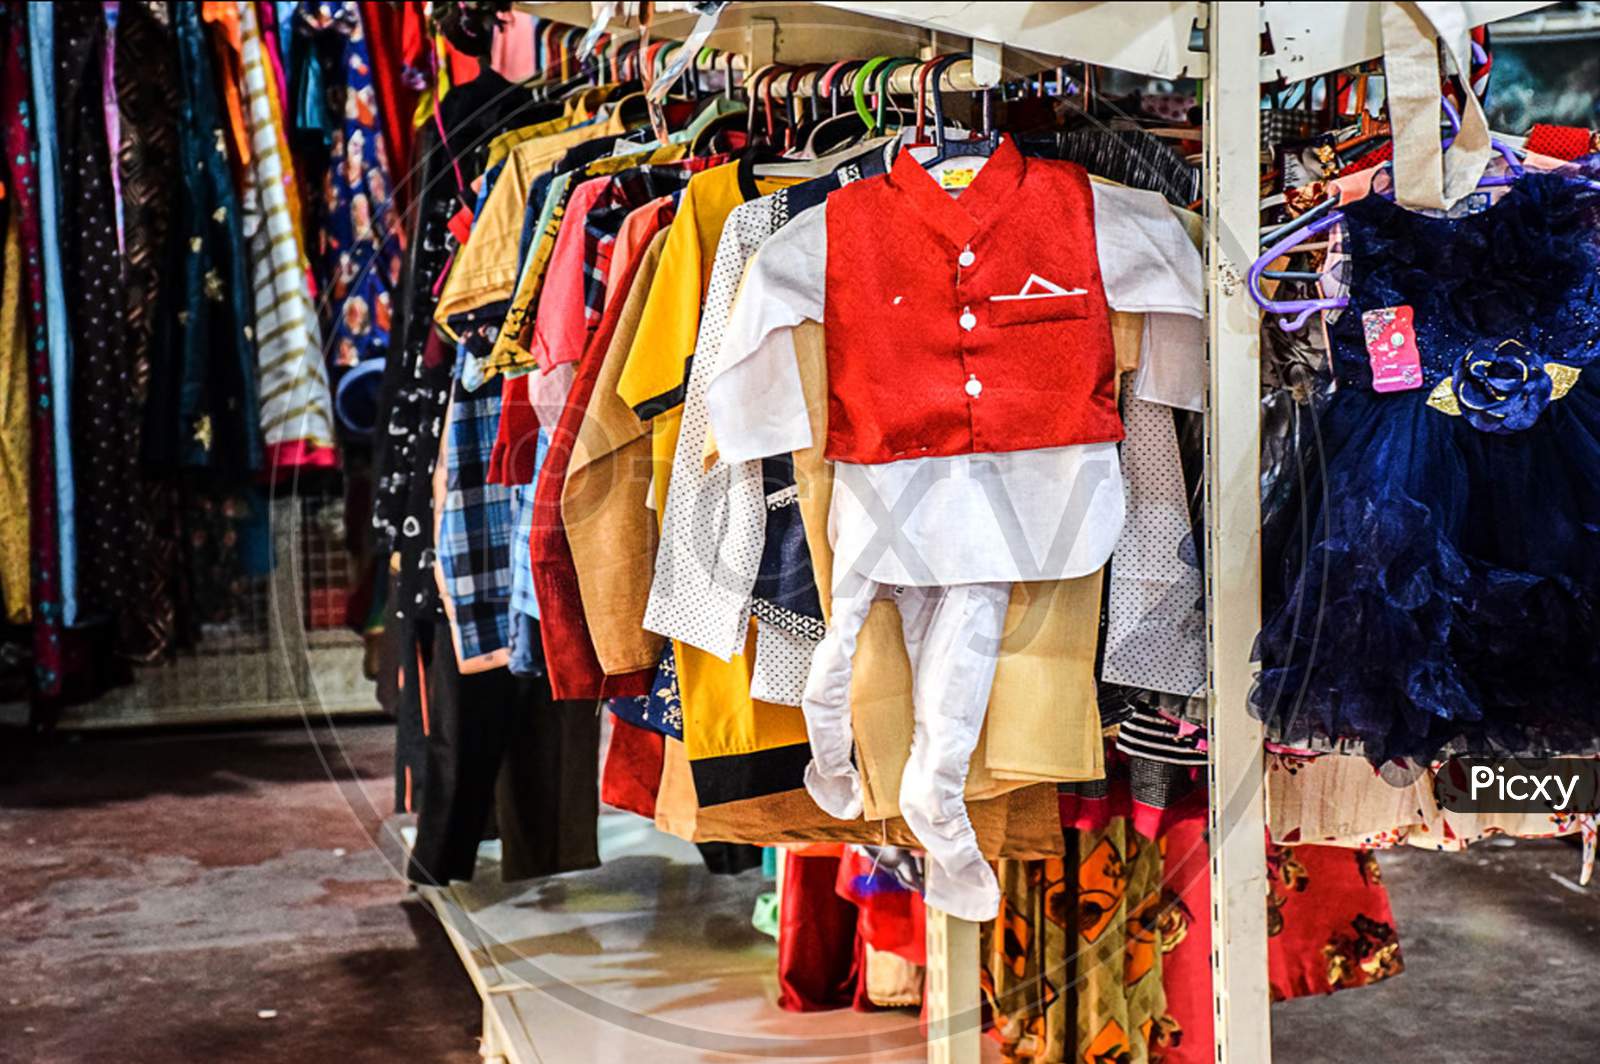 Stock Photo Of Children Cloths Hanging On Hanger In The Display Of Kids Clothing Store